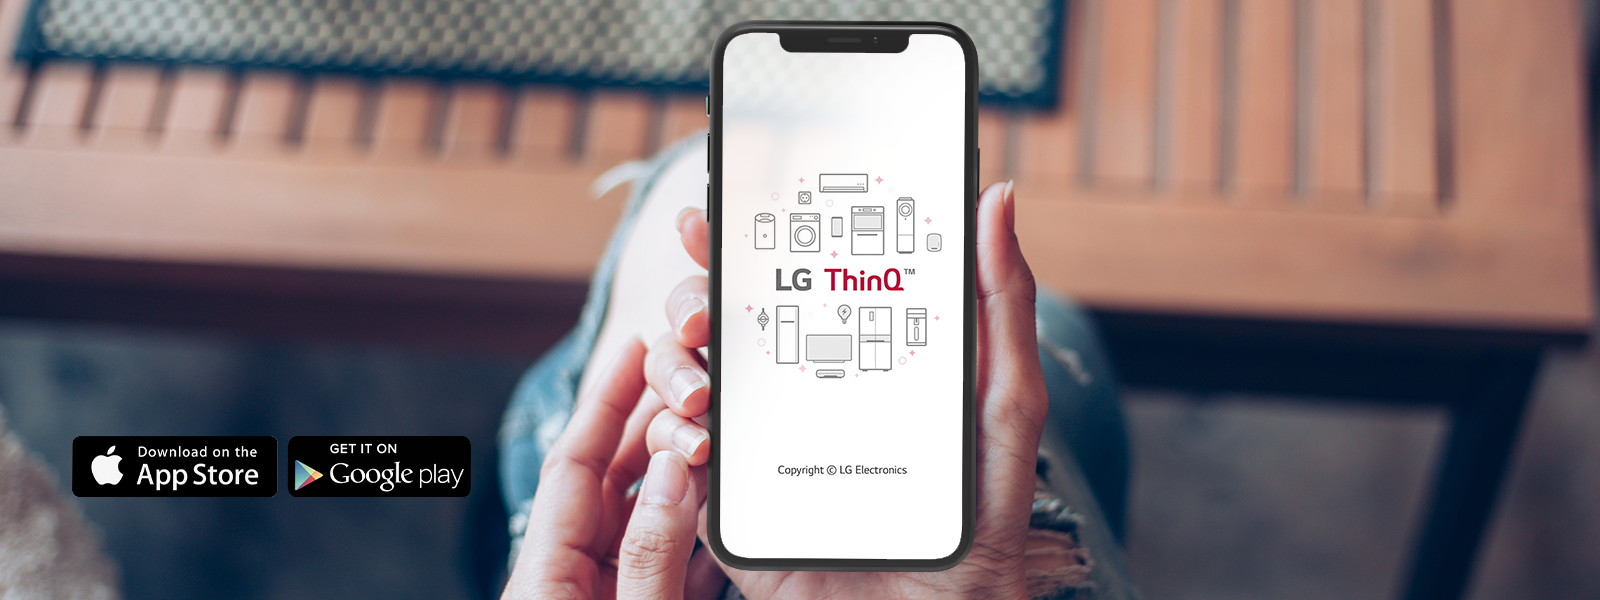 LG Takes Smart Living Up a Notch with LG ThinQ App